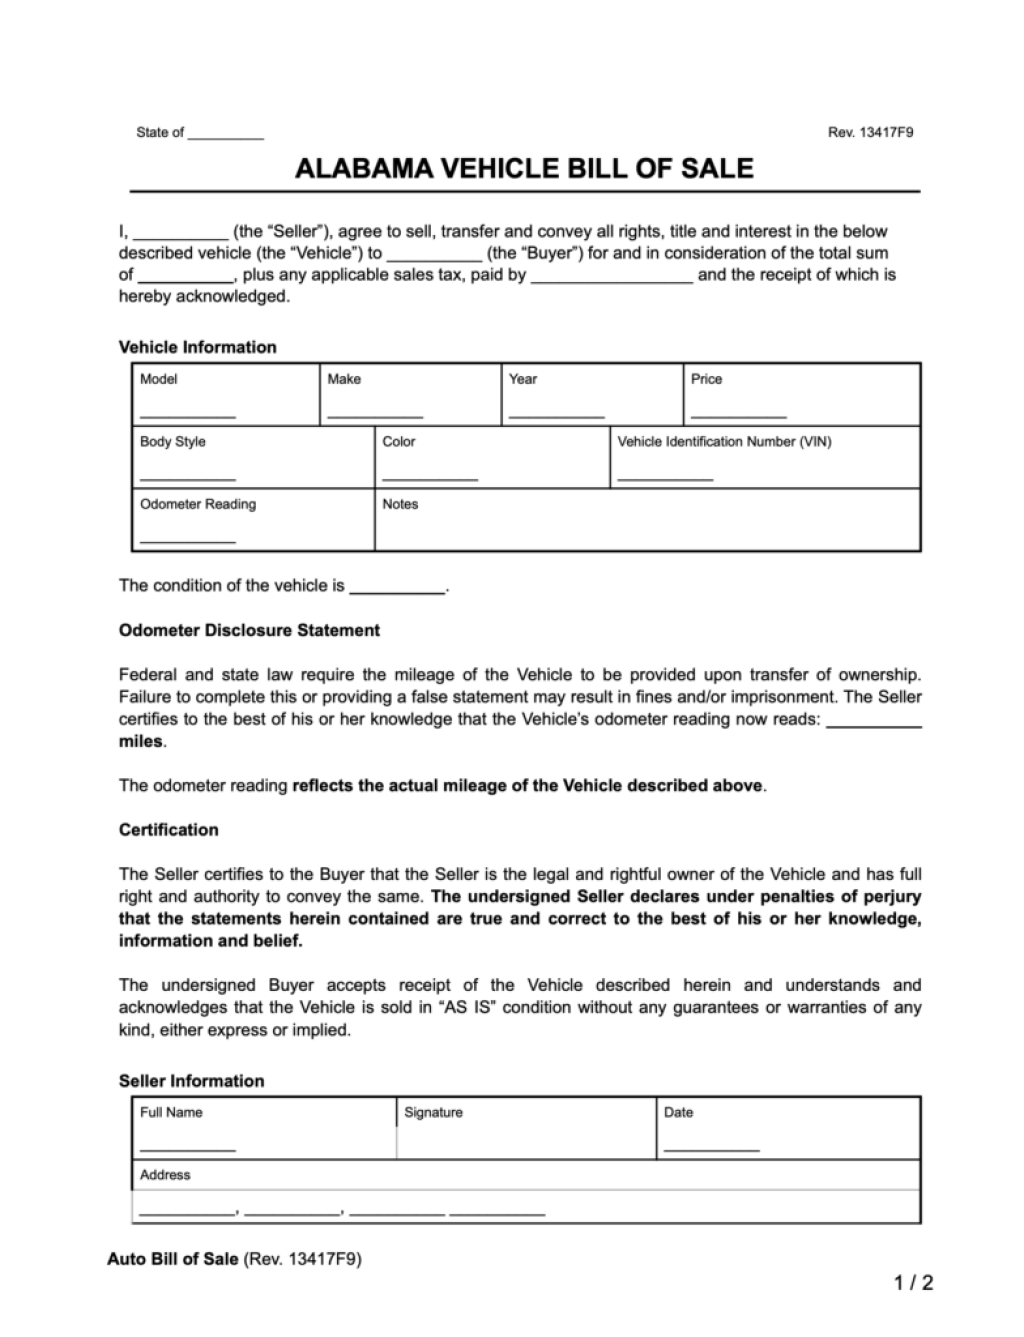 Picture of: Free Alabama Vehicle Bill of Sale Form  Legal Templates